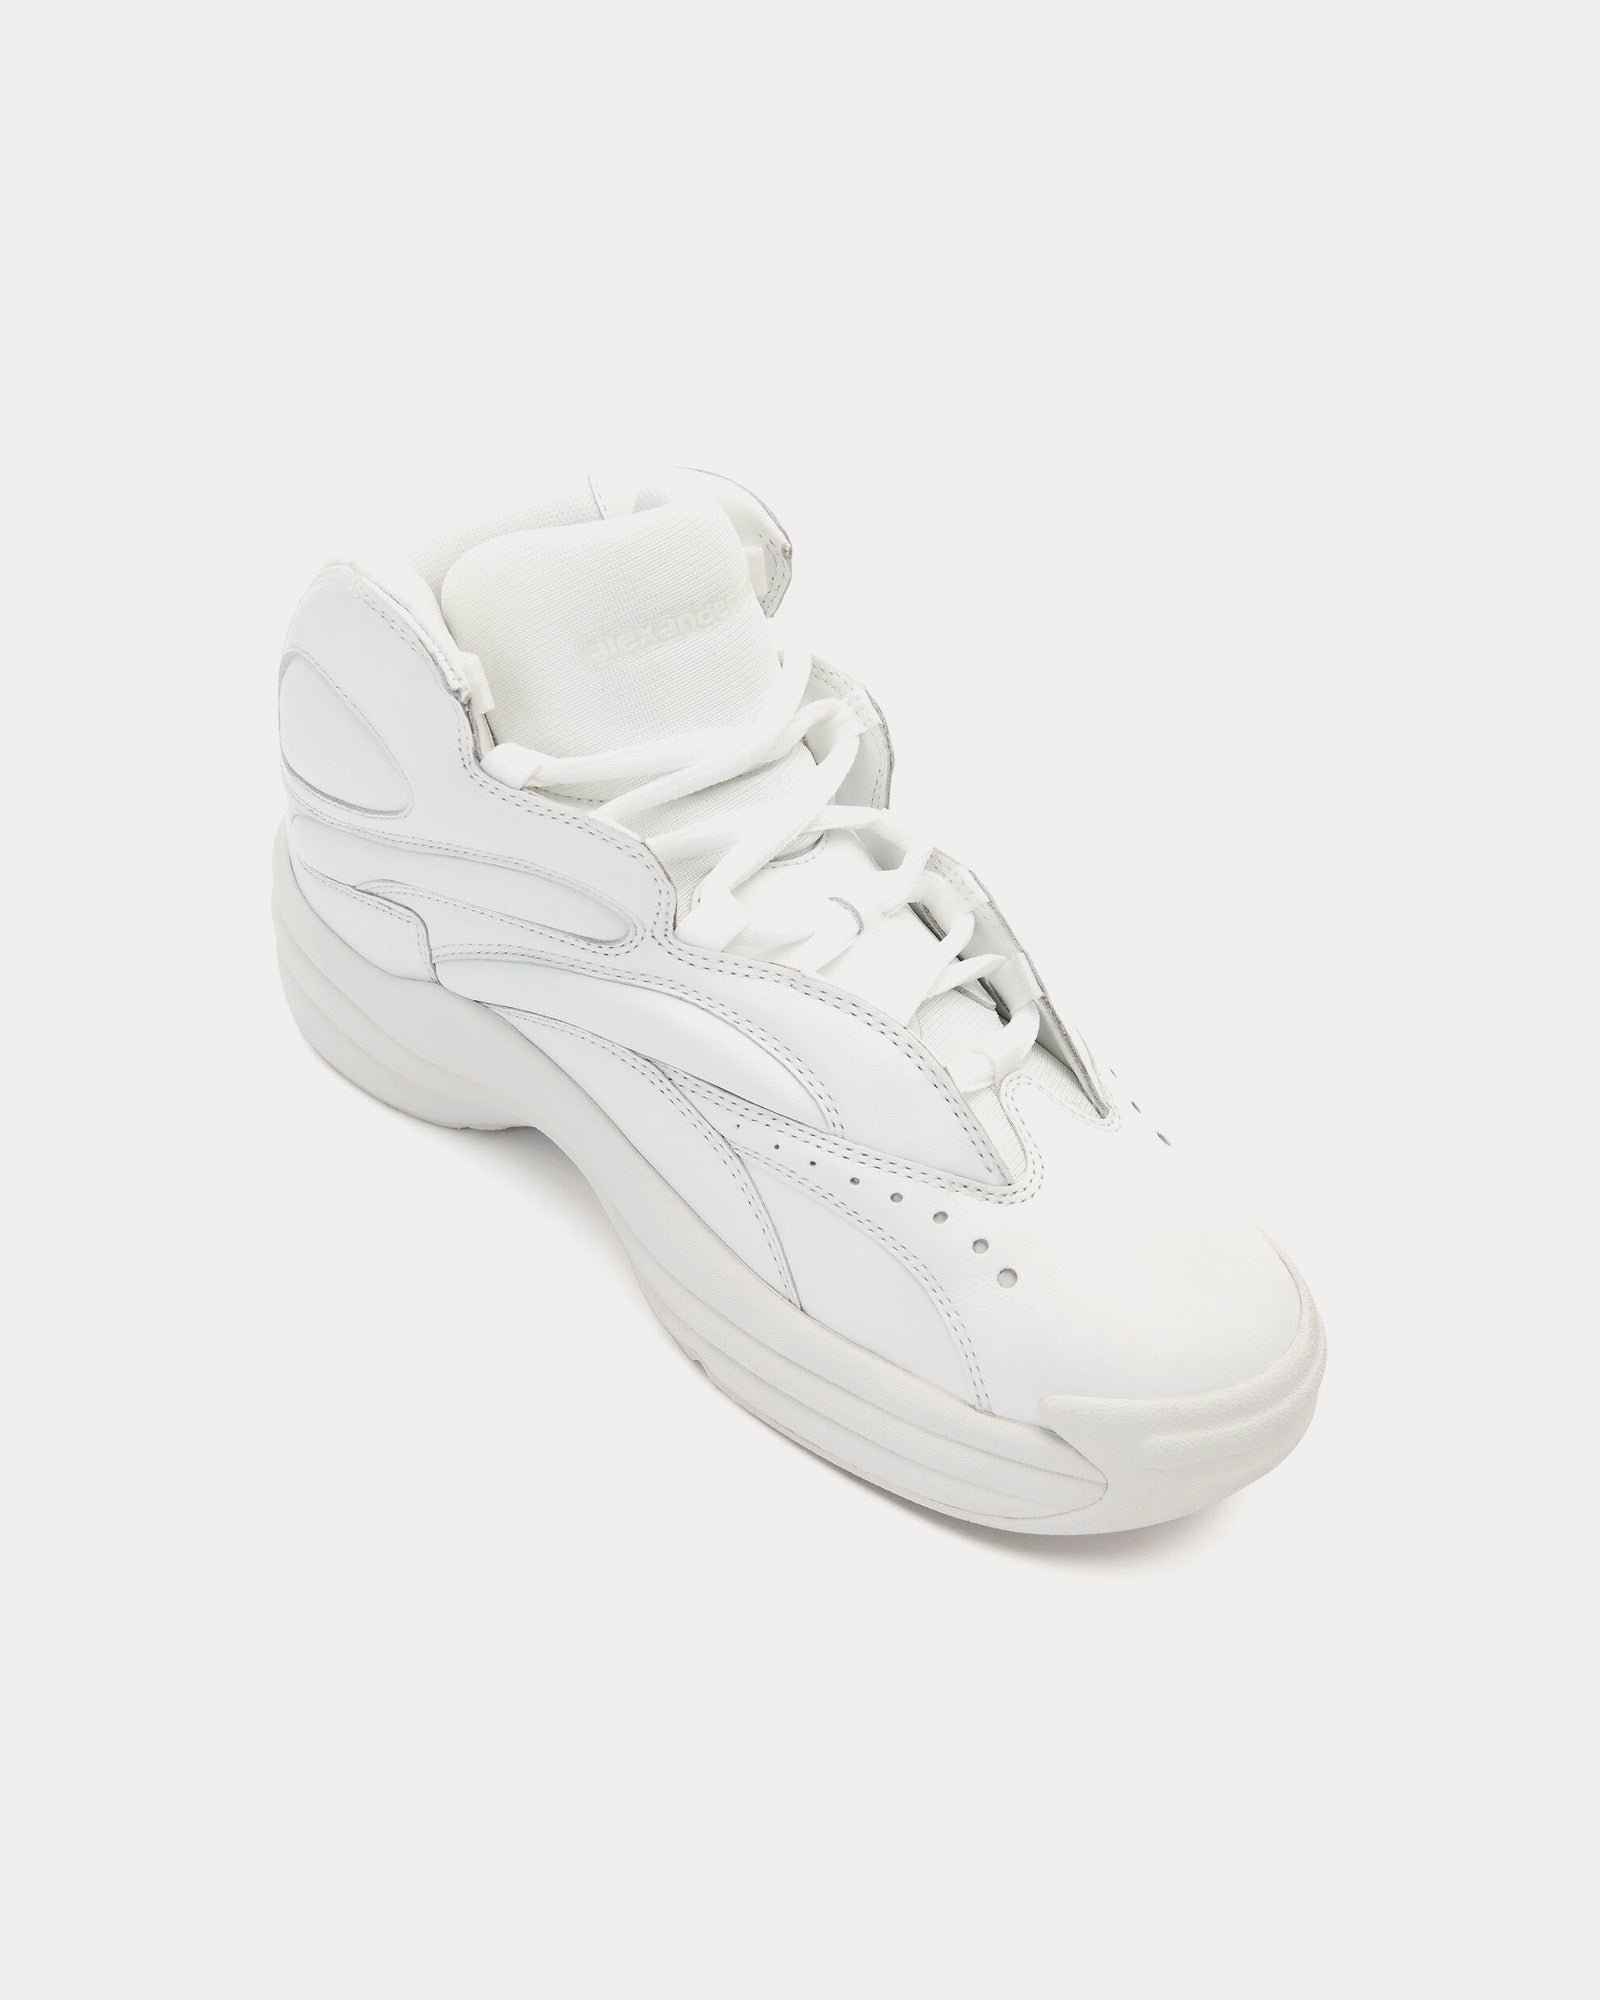 Alexander Wang - AW Hoop Leather White High Top Sneakers